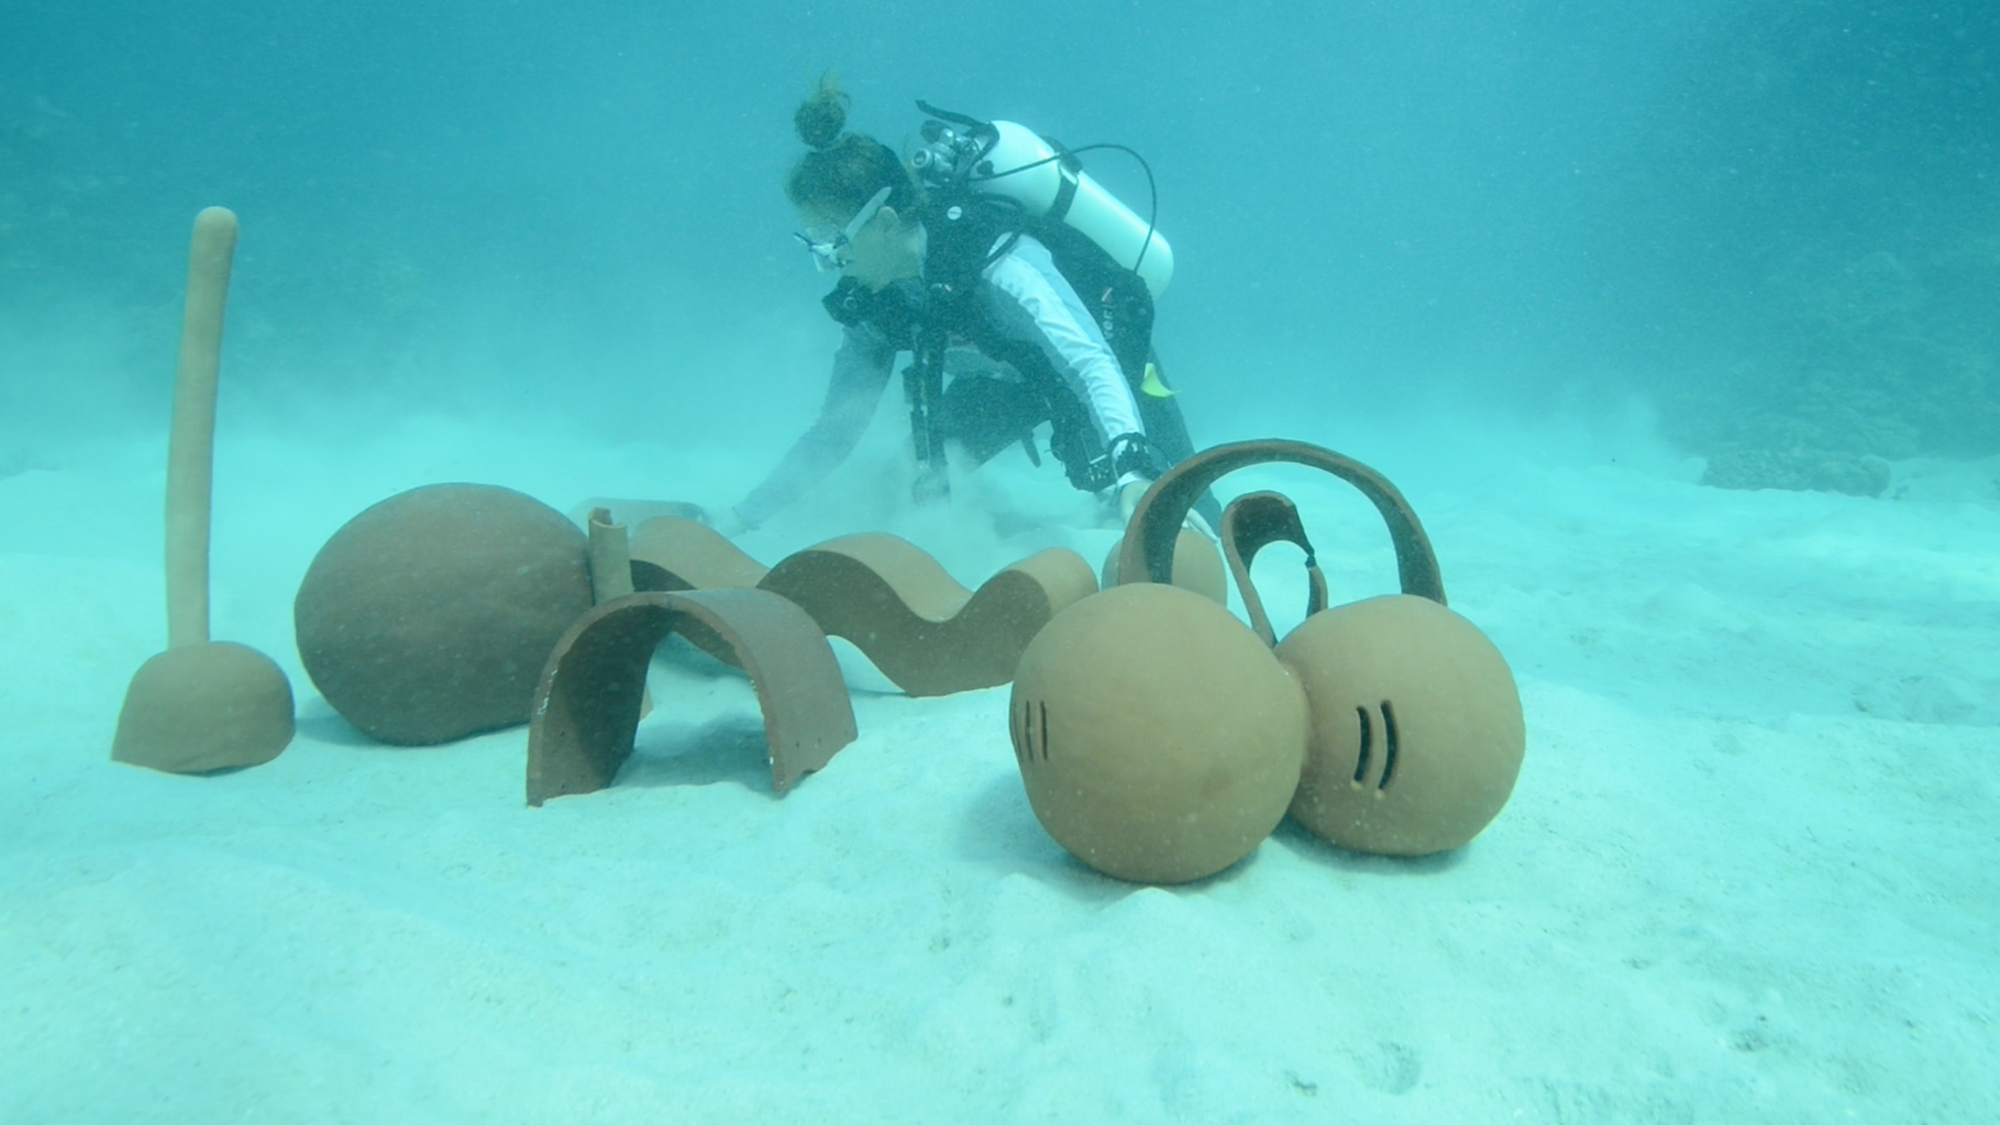 Marie Griesmar setting up an artistic installation underwater